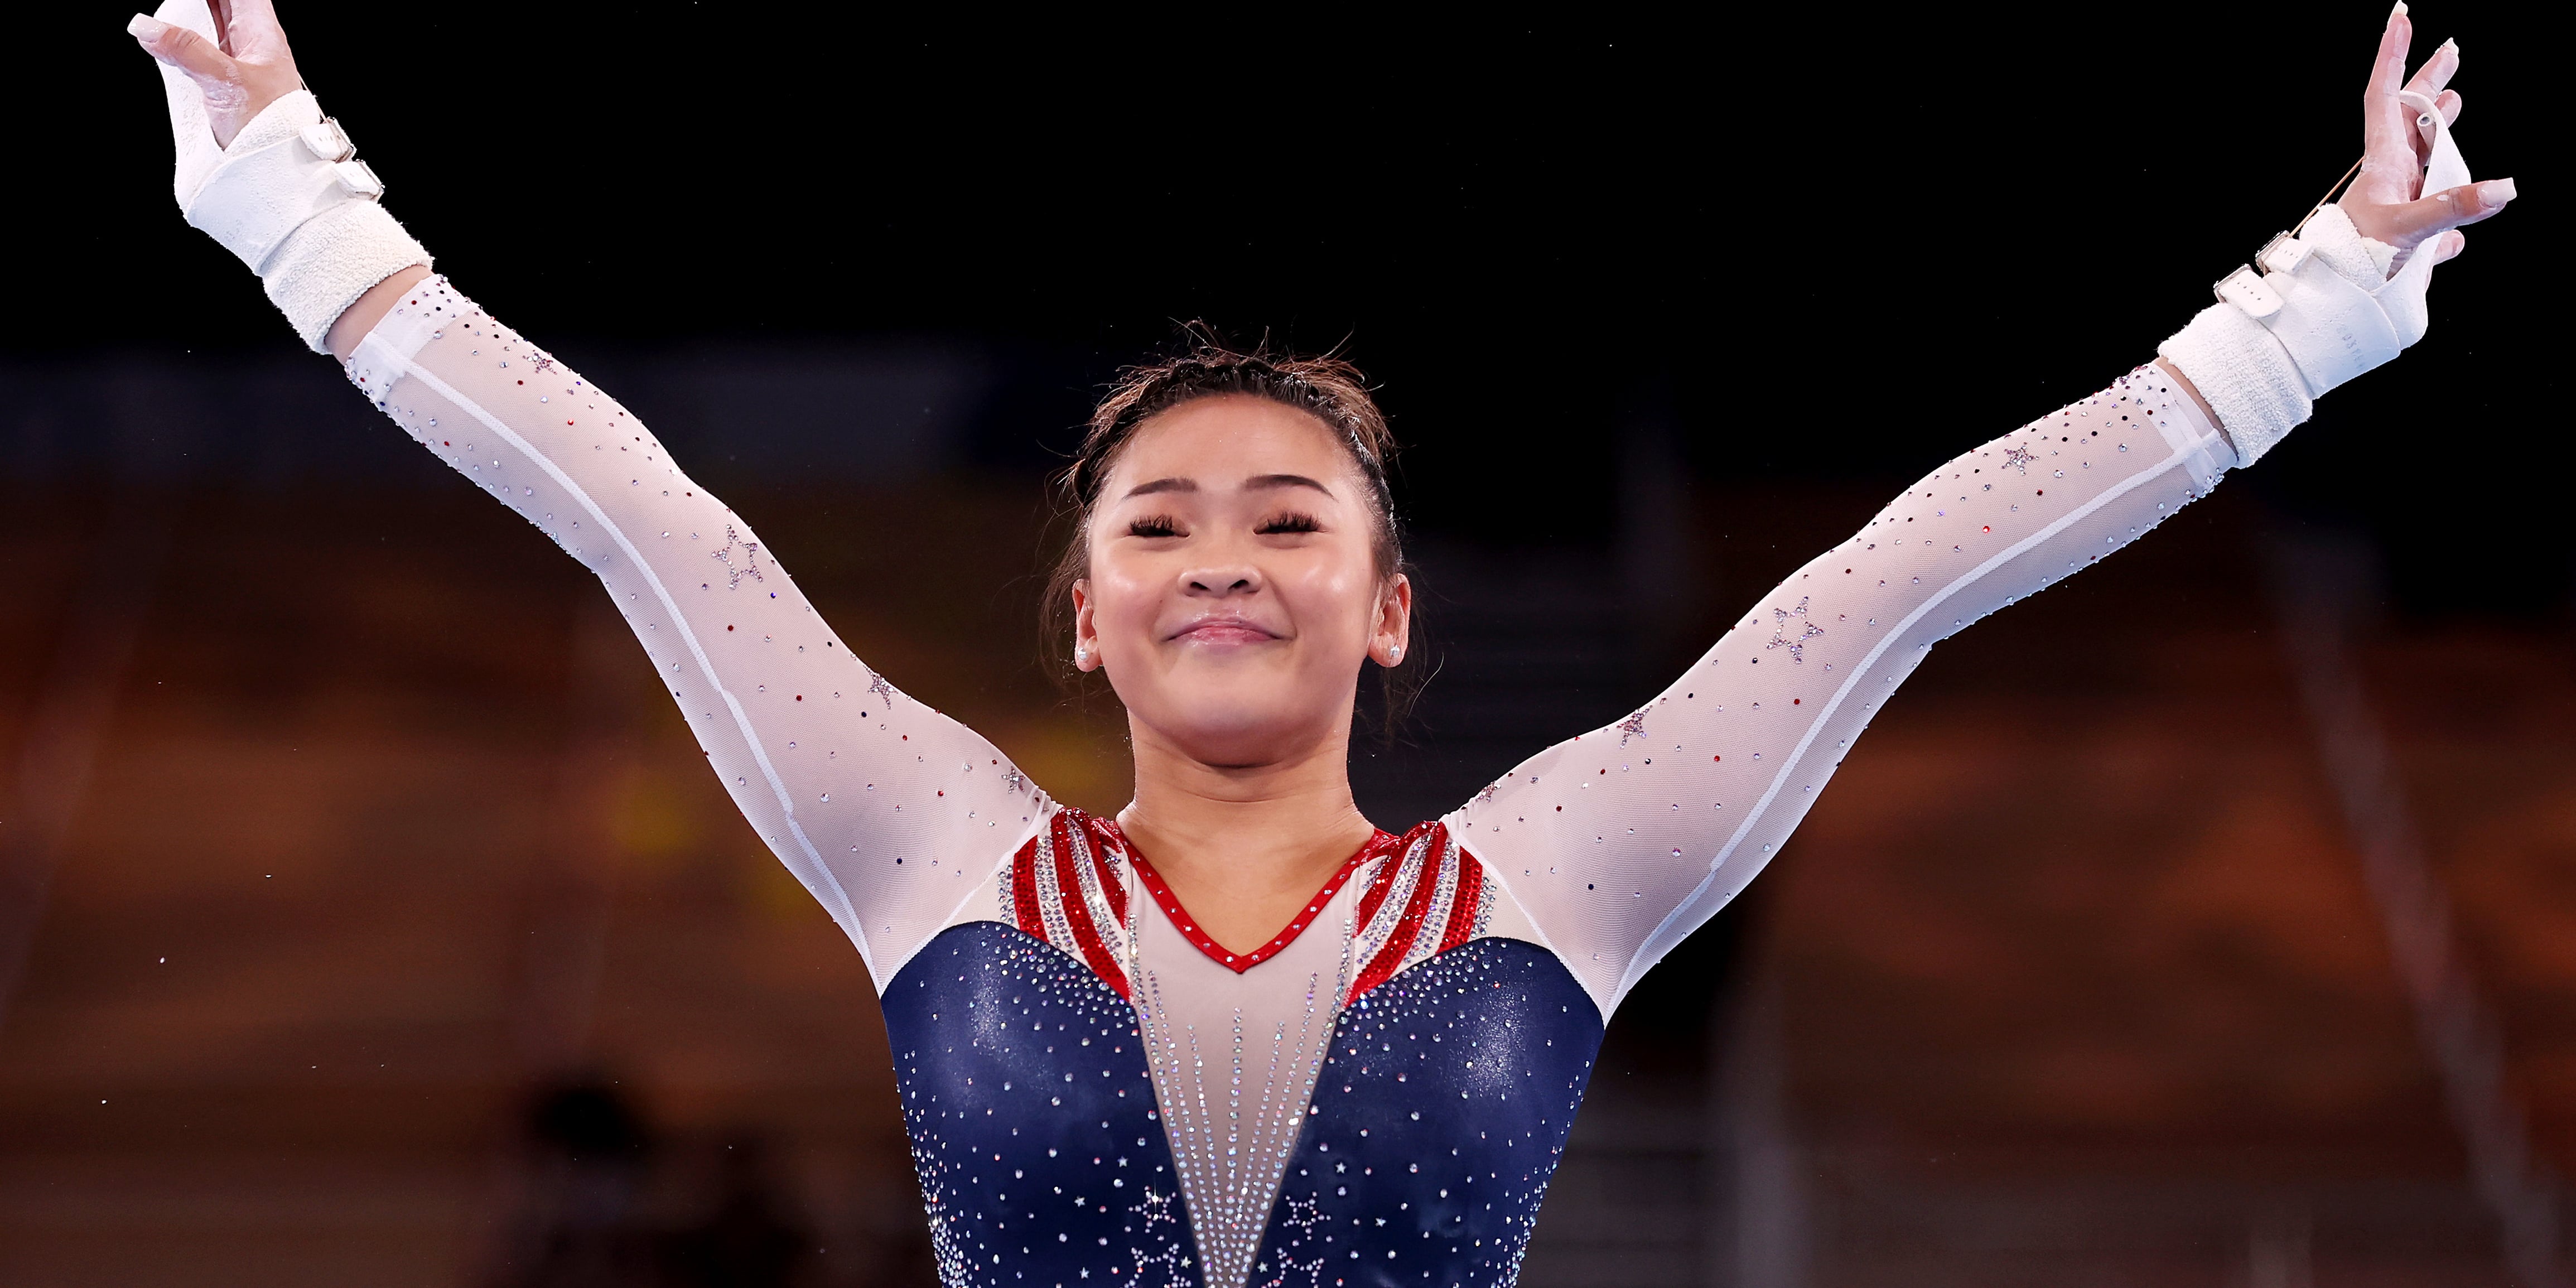 Why women gymnasts at the Tokyo Olympics perform to music and men don't